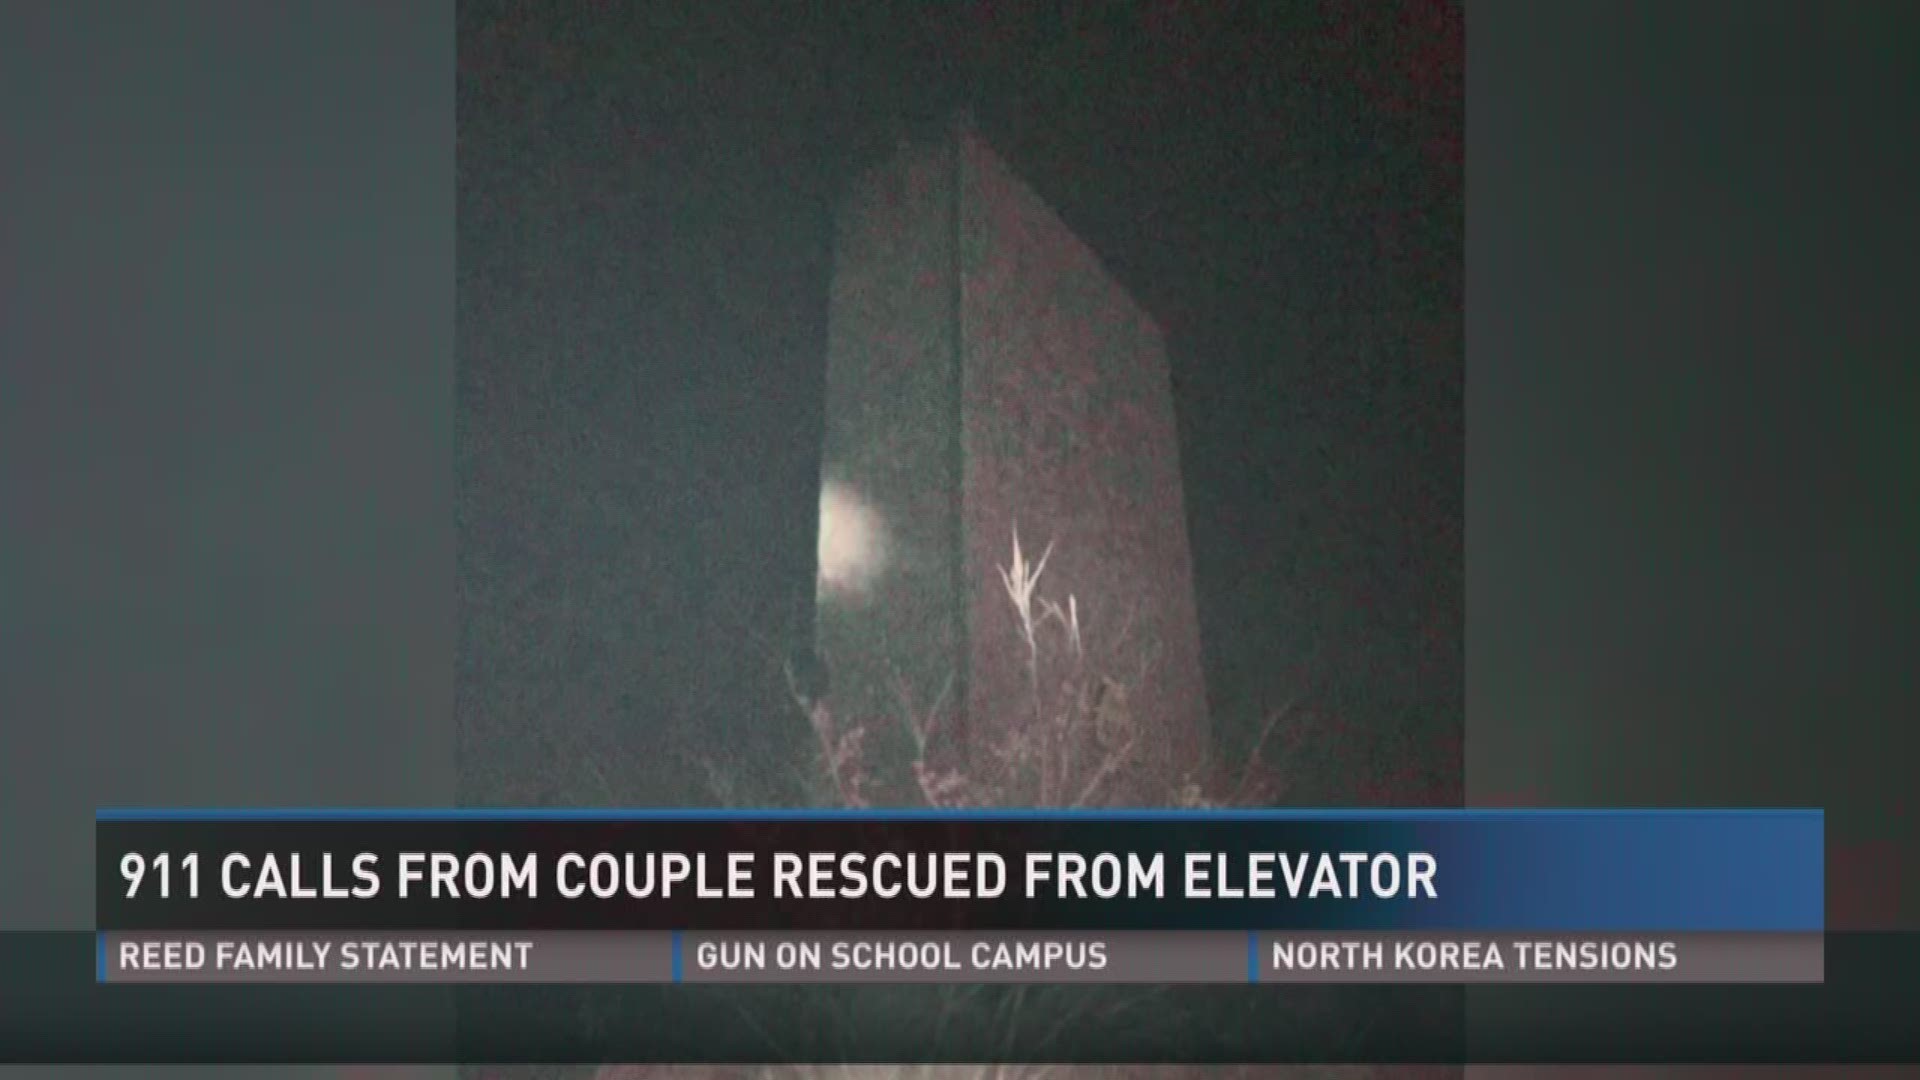 An Alabama couple was trapped for hours in an elevator at Westgate Resort during the Gatlinburg wildfires. The 911 calls show how the dispatcher tried to keep them alive and calm until help arrived.